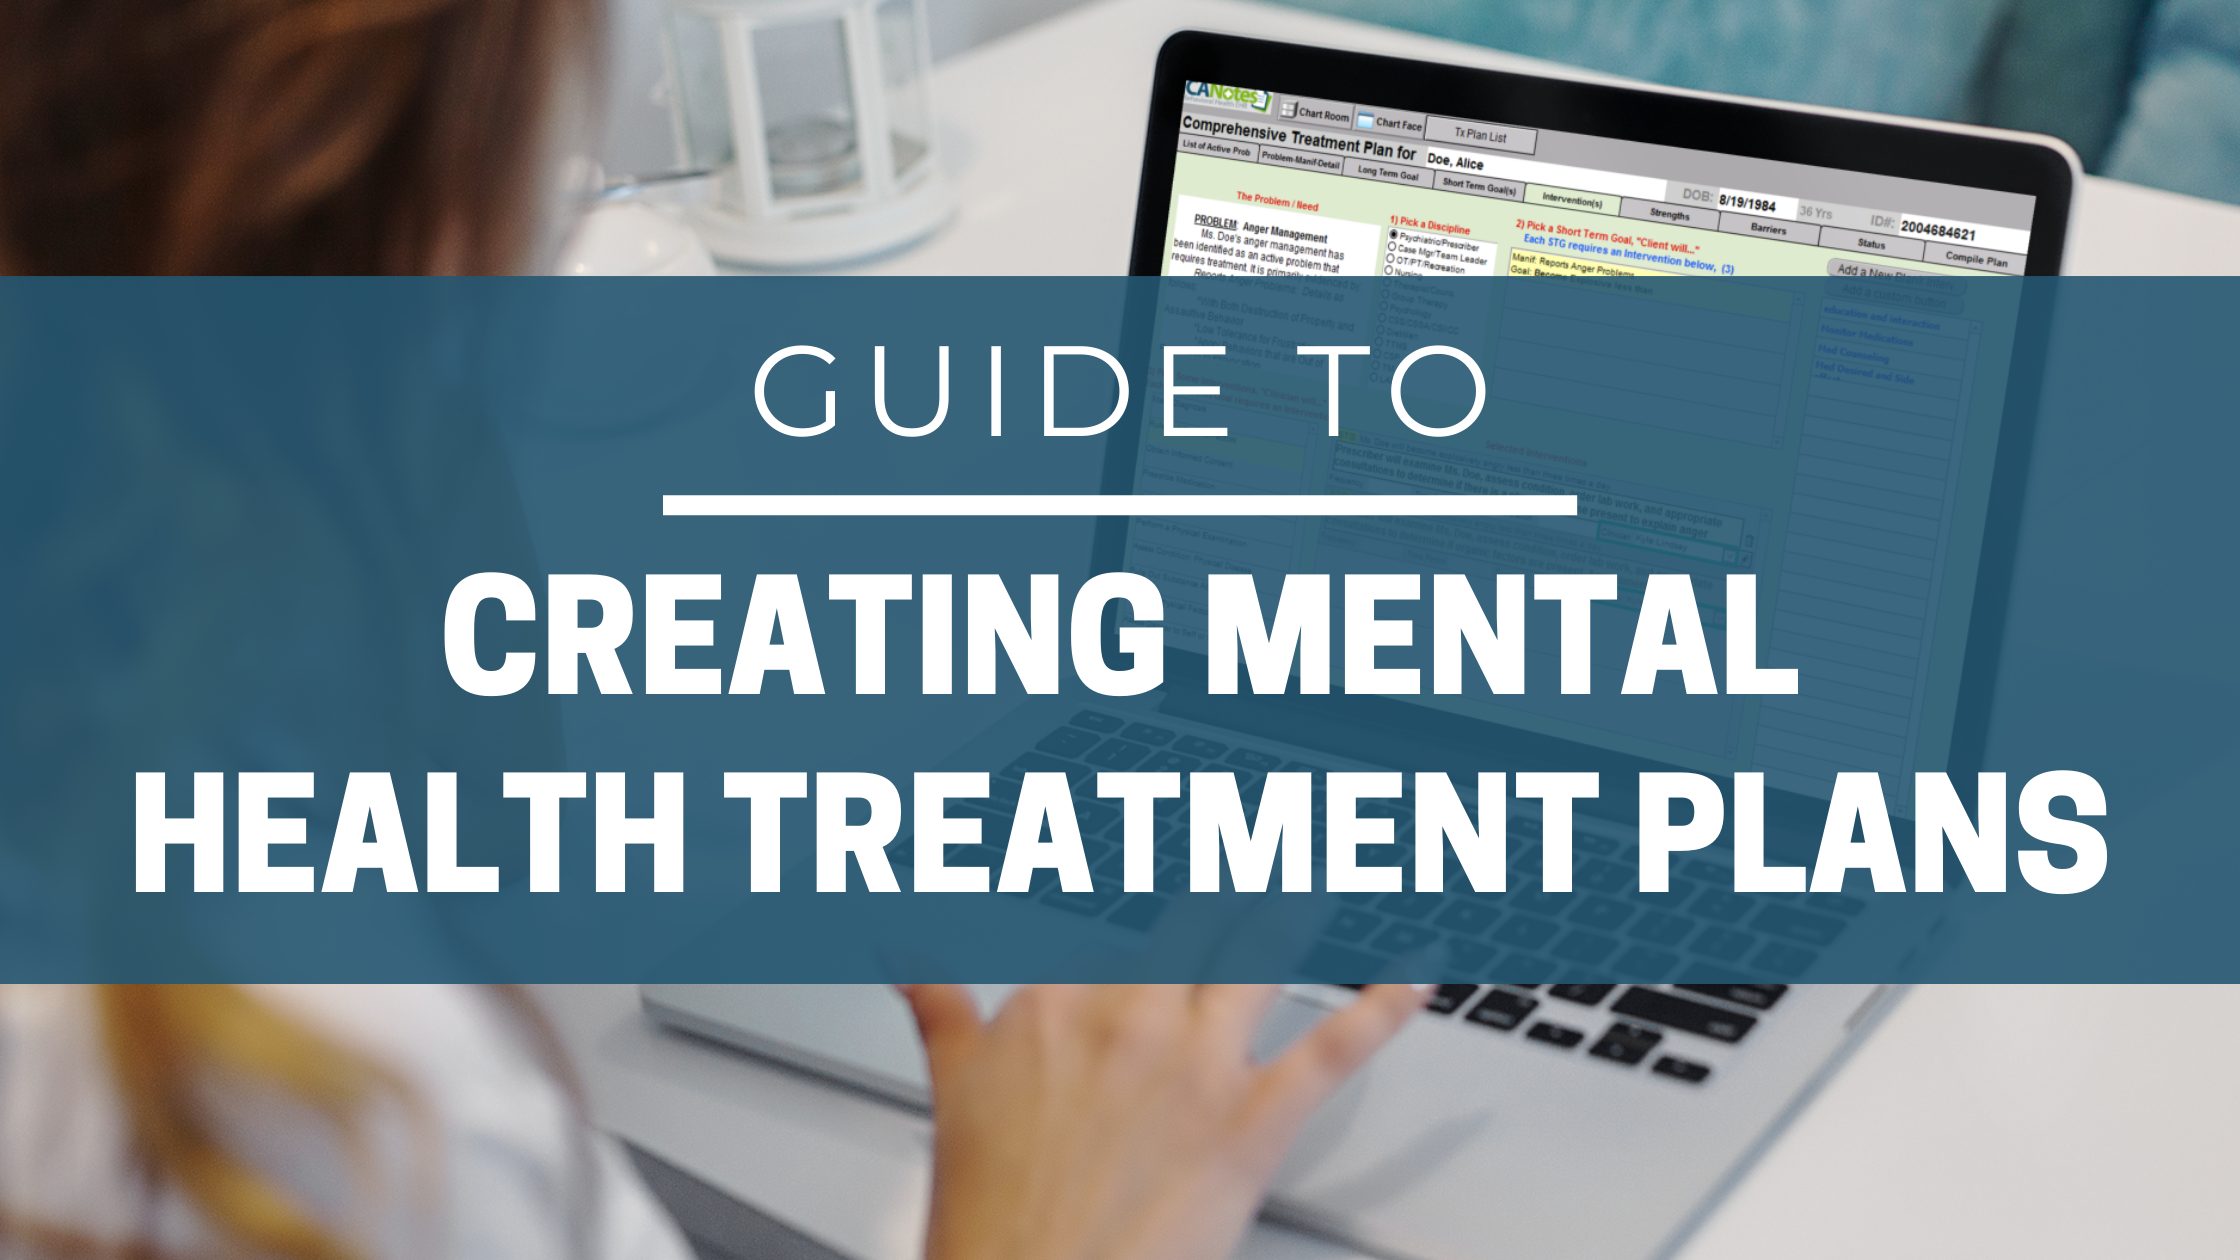 Guide to Creating Mental Health Treatment Plans